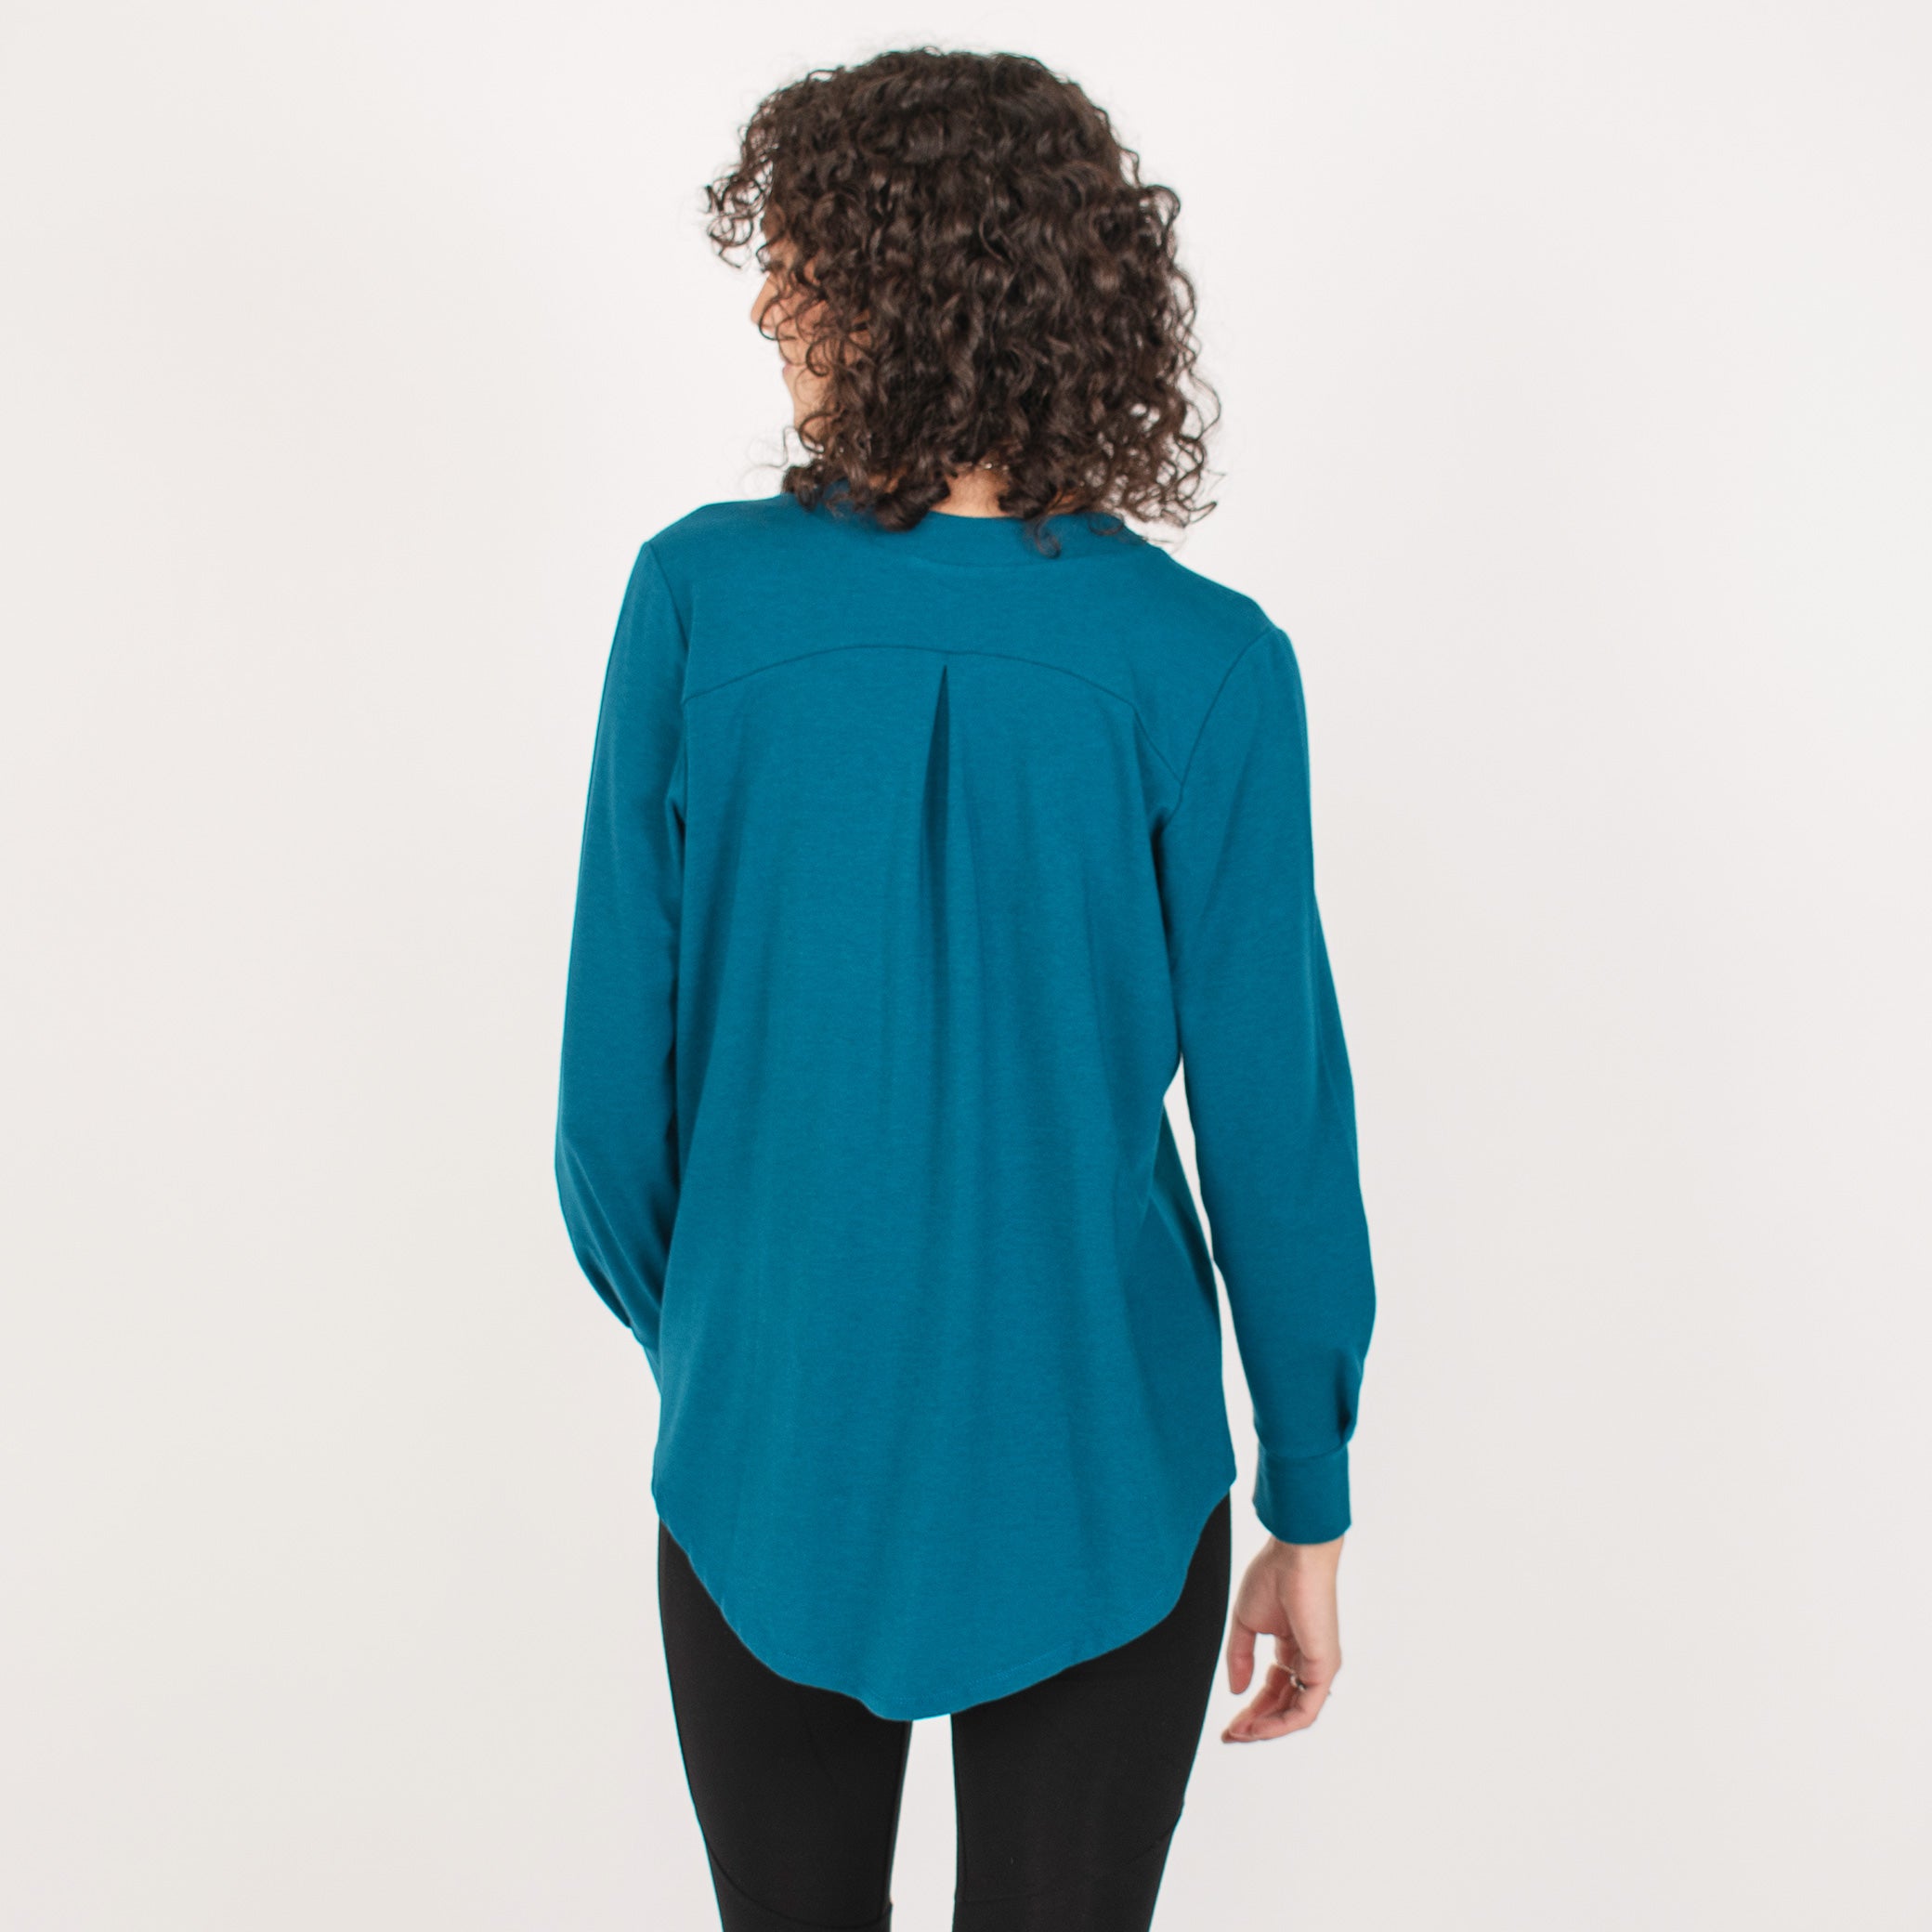 Woman wearing bright blue long sleeve button up shirt with black leggings